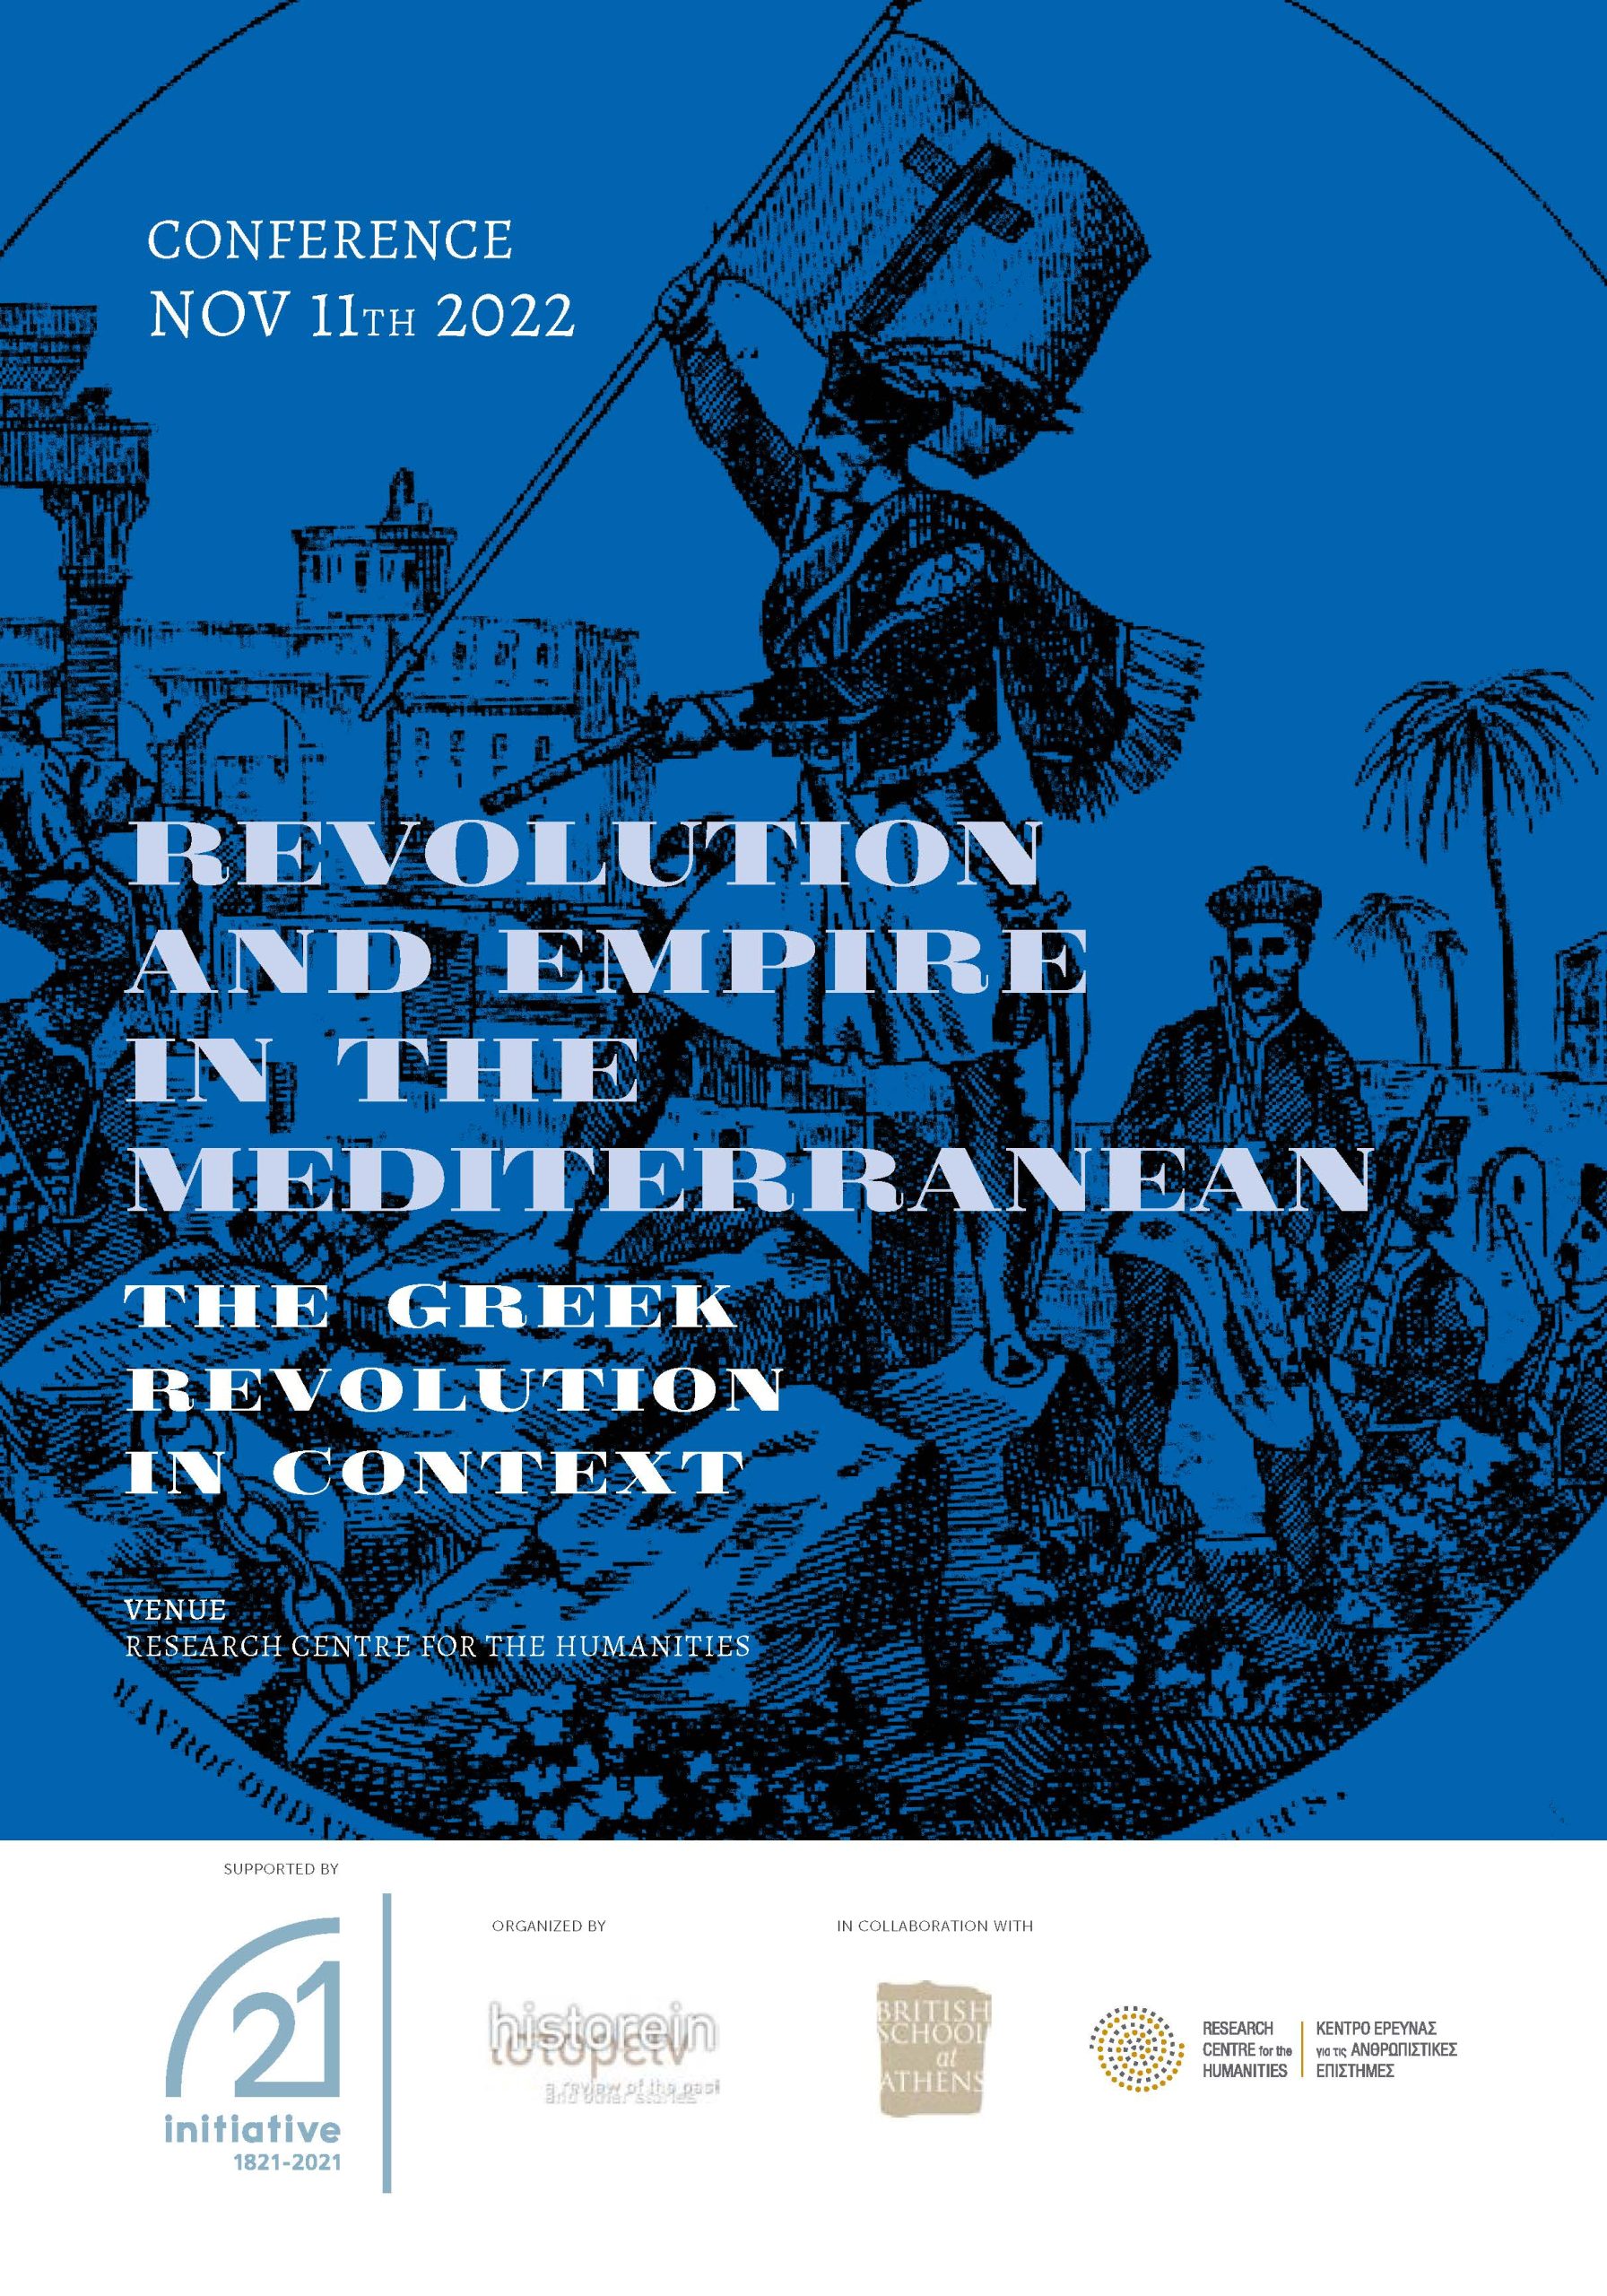 Conference: “Revolution and Empire in the Mediterranean: The Greek Revolution in context”